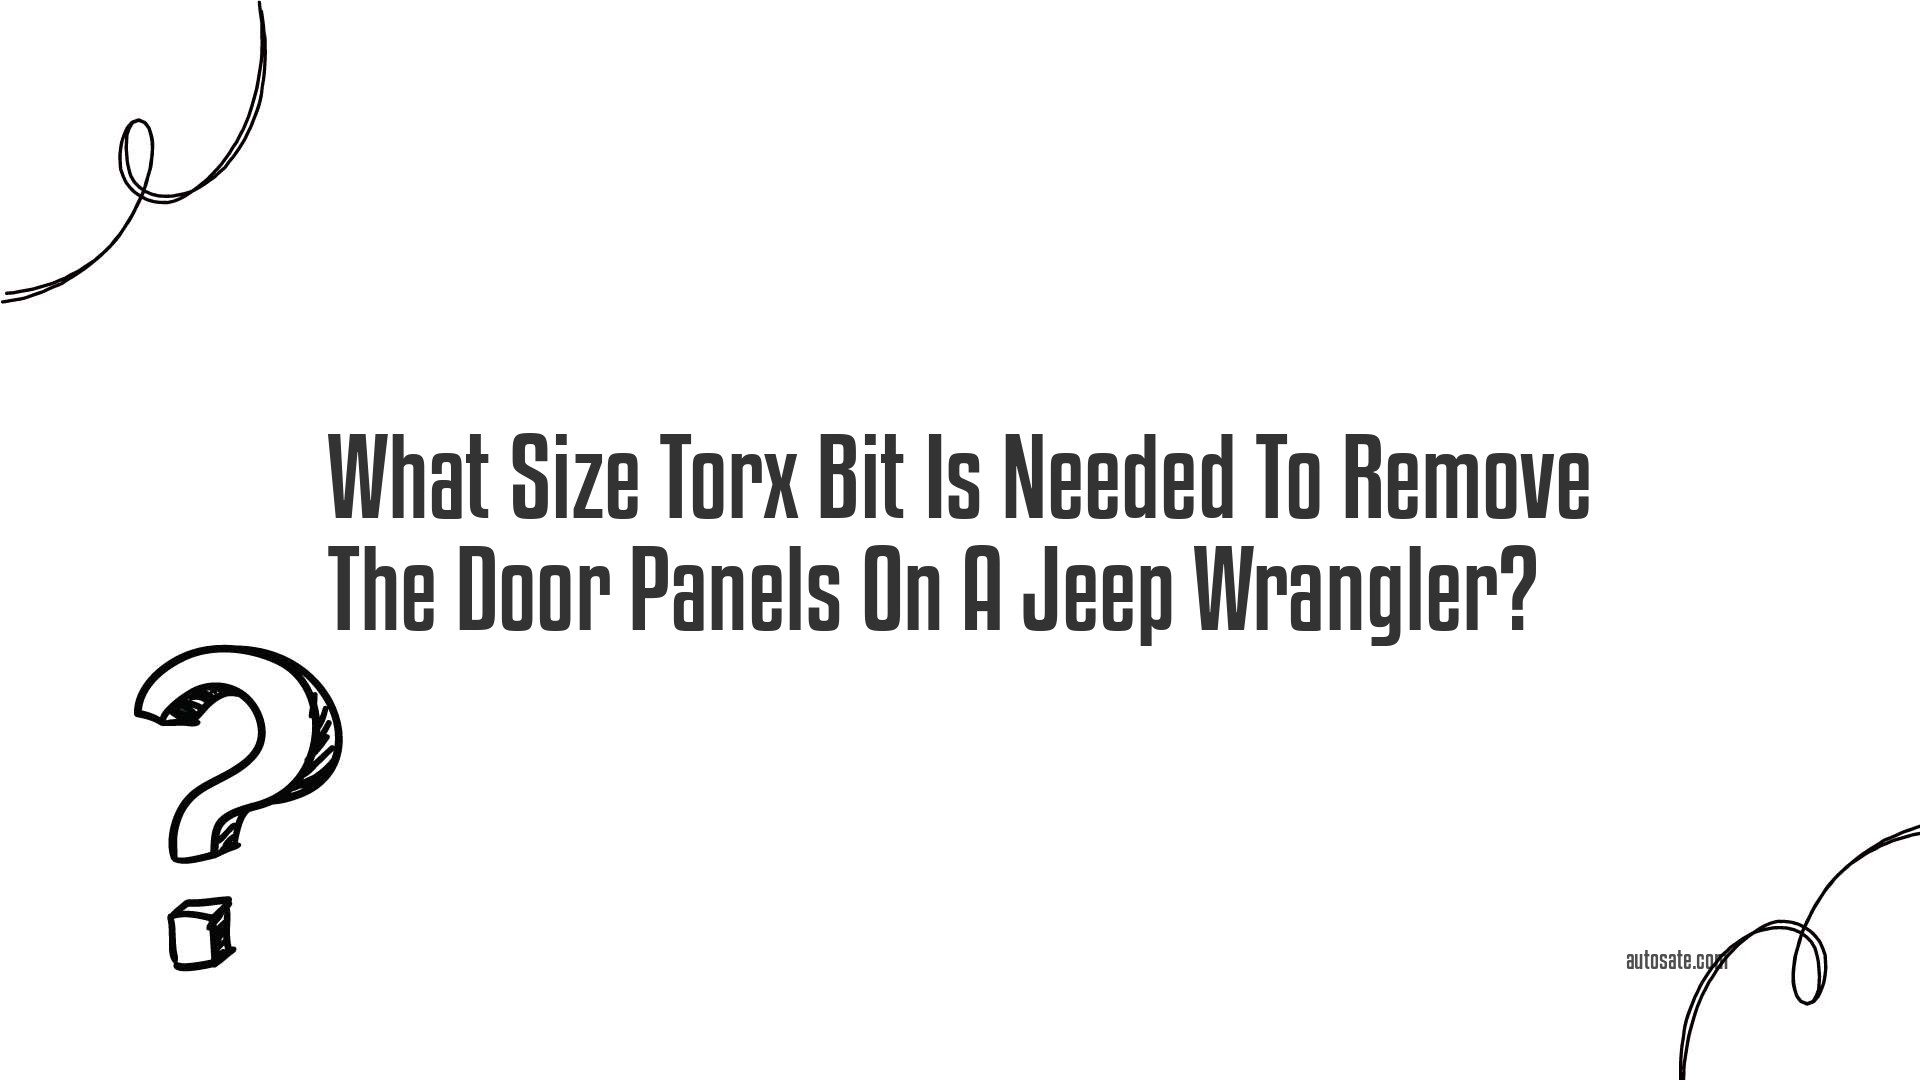 What Size Torx Bit Is Needed To Remove The Door Panels On A Jeep Wrangler?